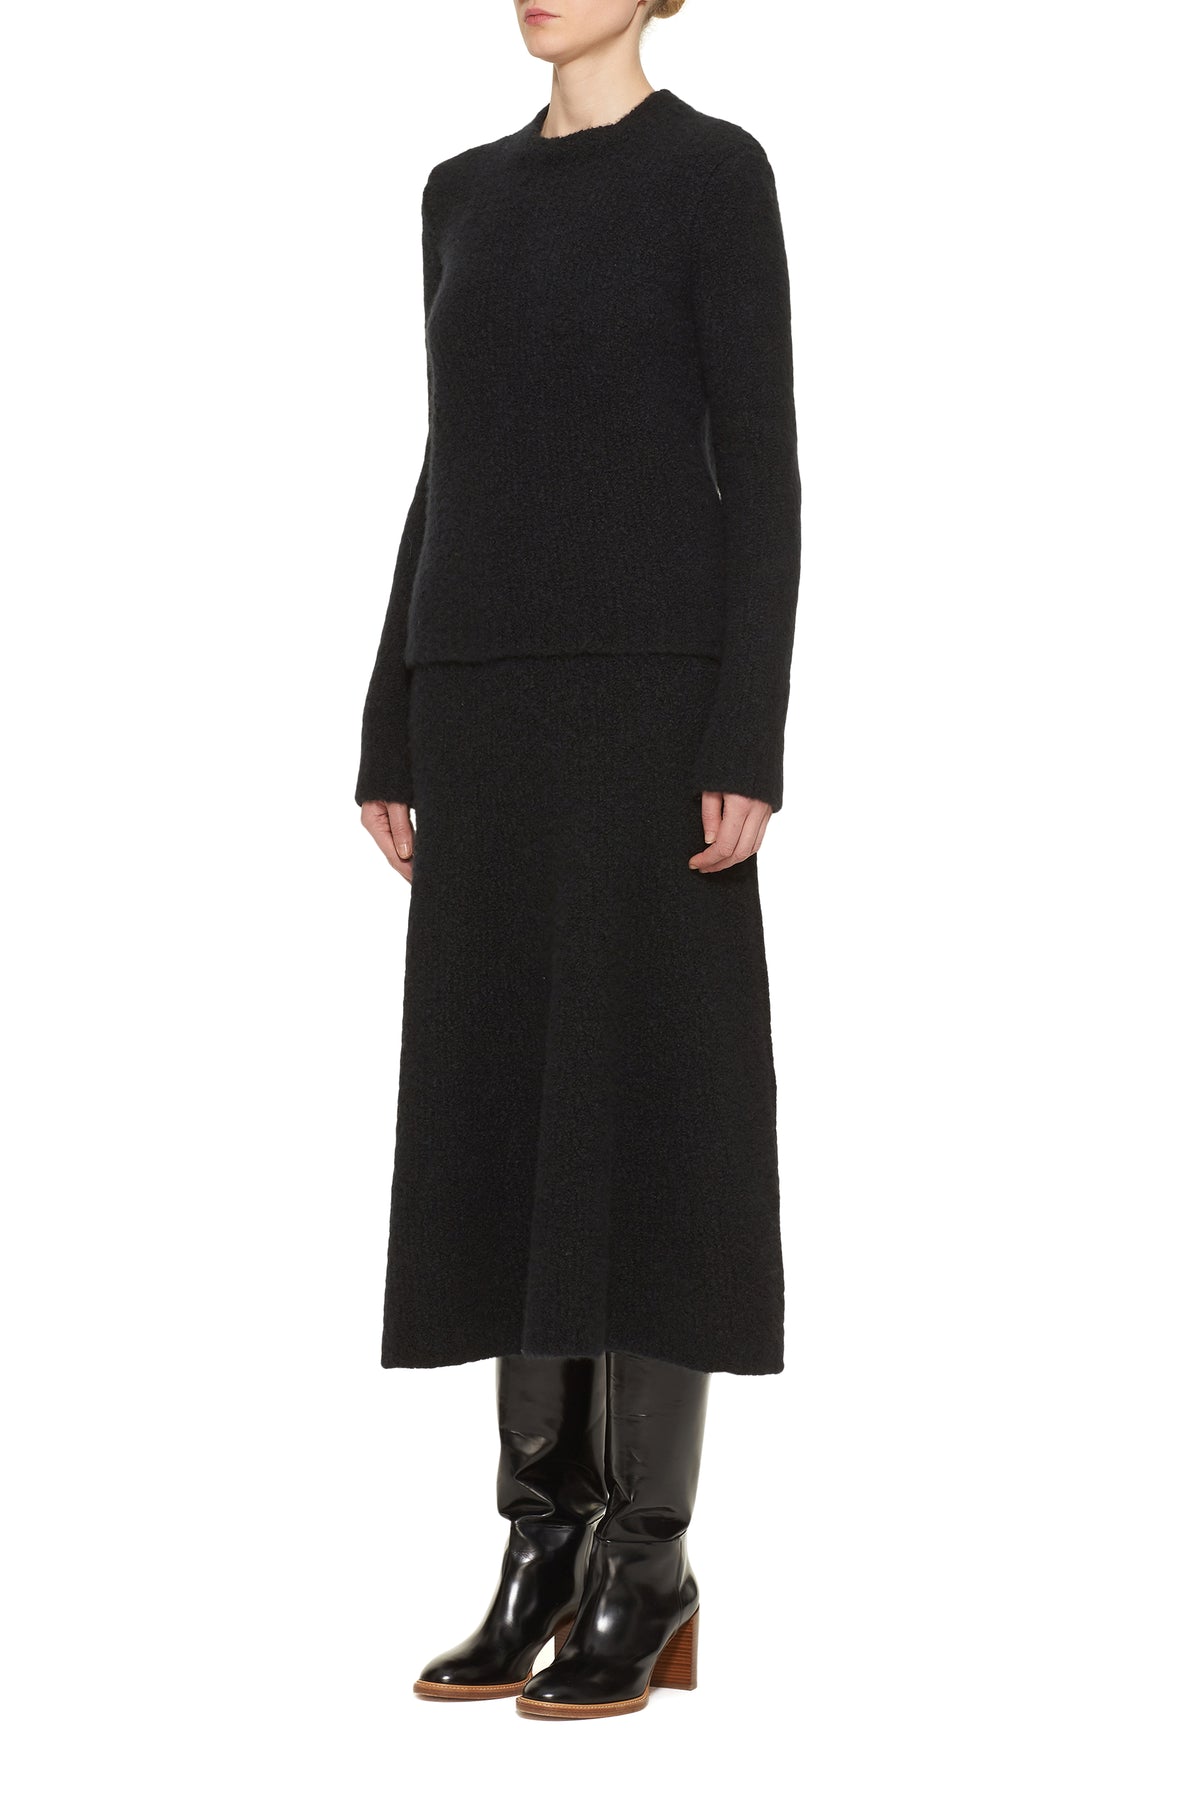 Pablo Skirt in Black Cashmere Boucle